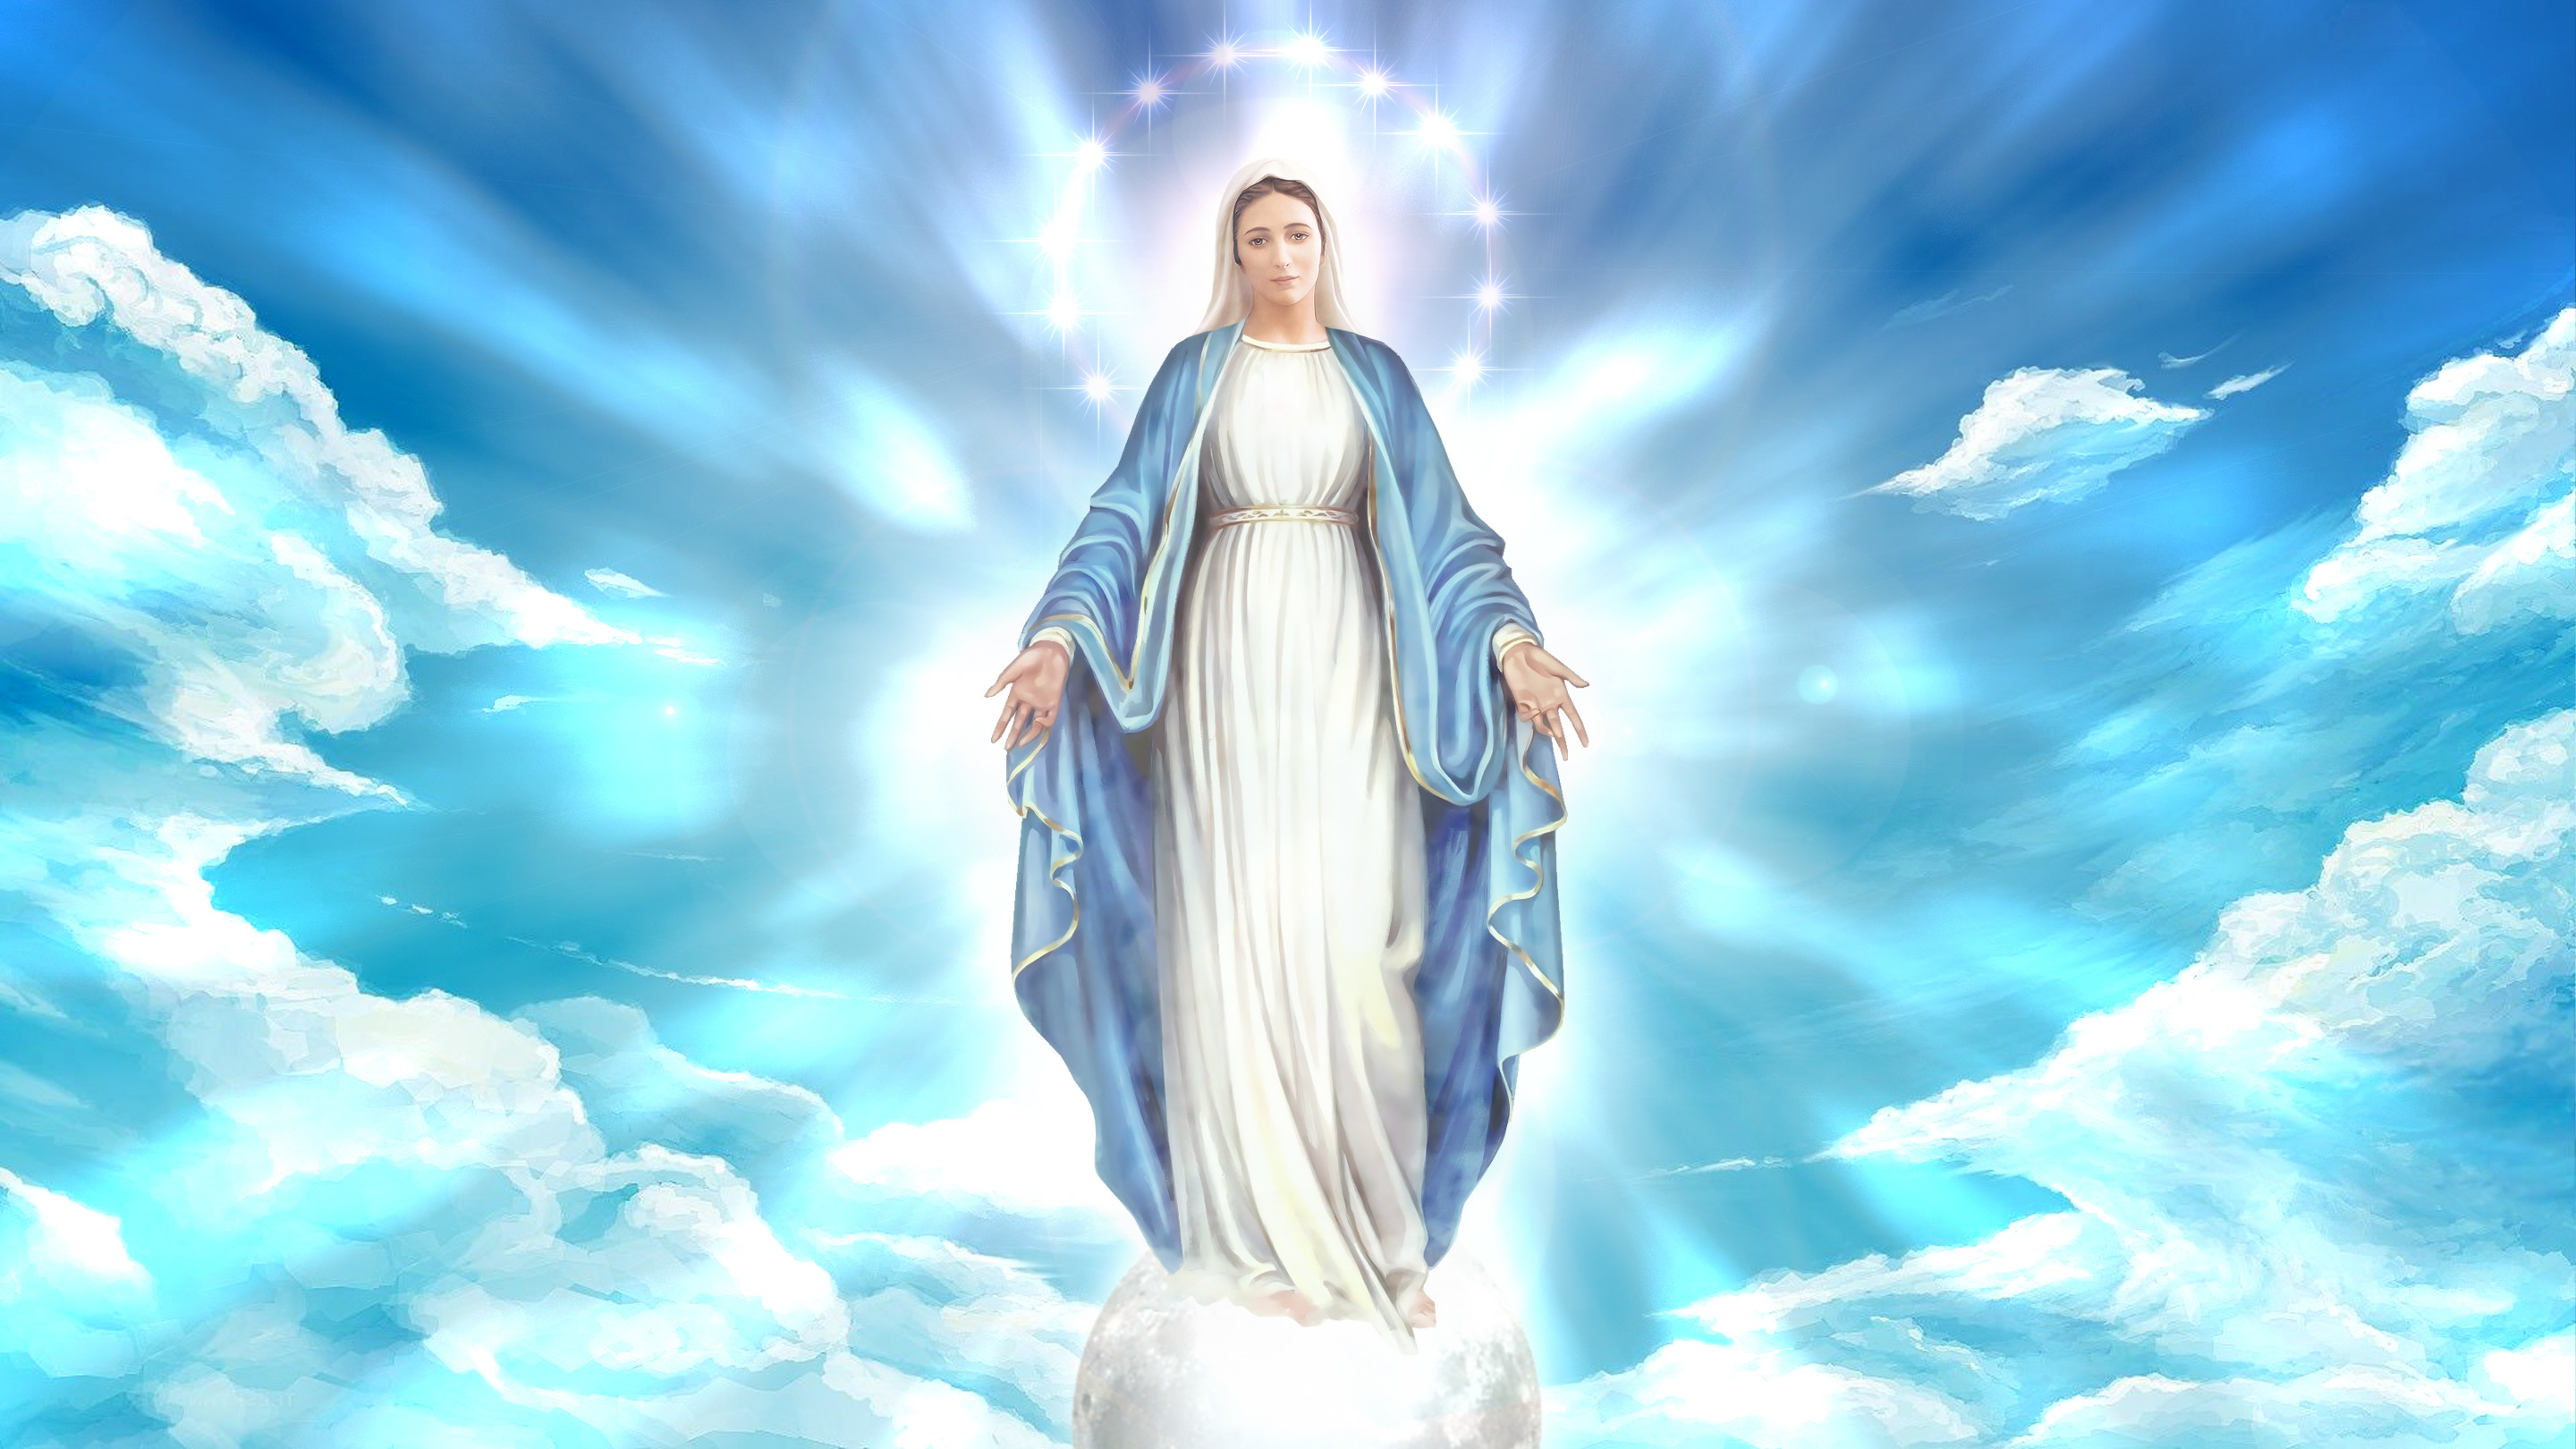 Mother Mary Wallpaper Image